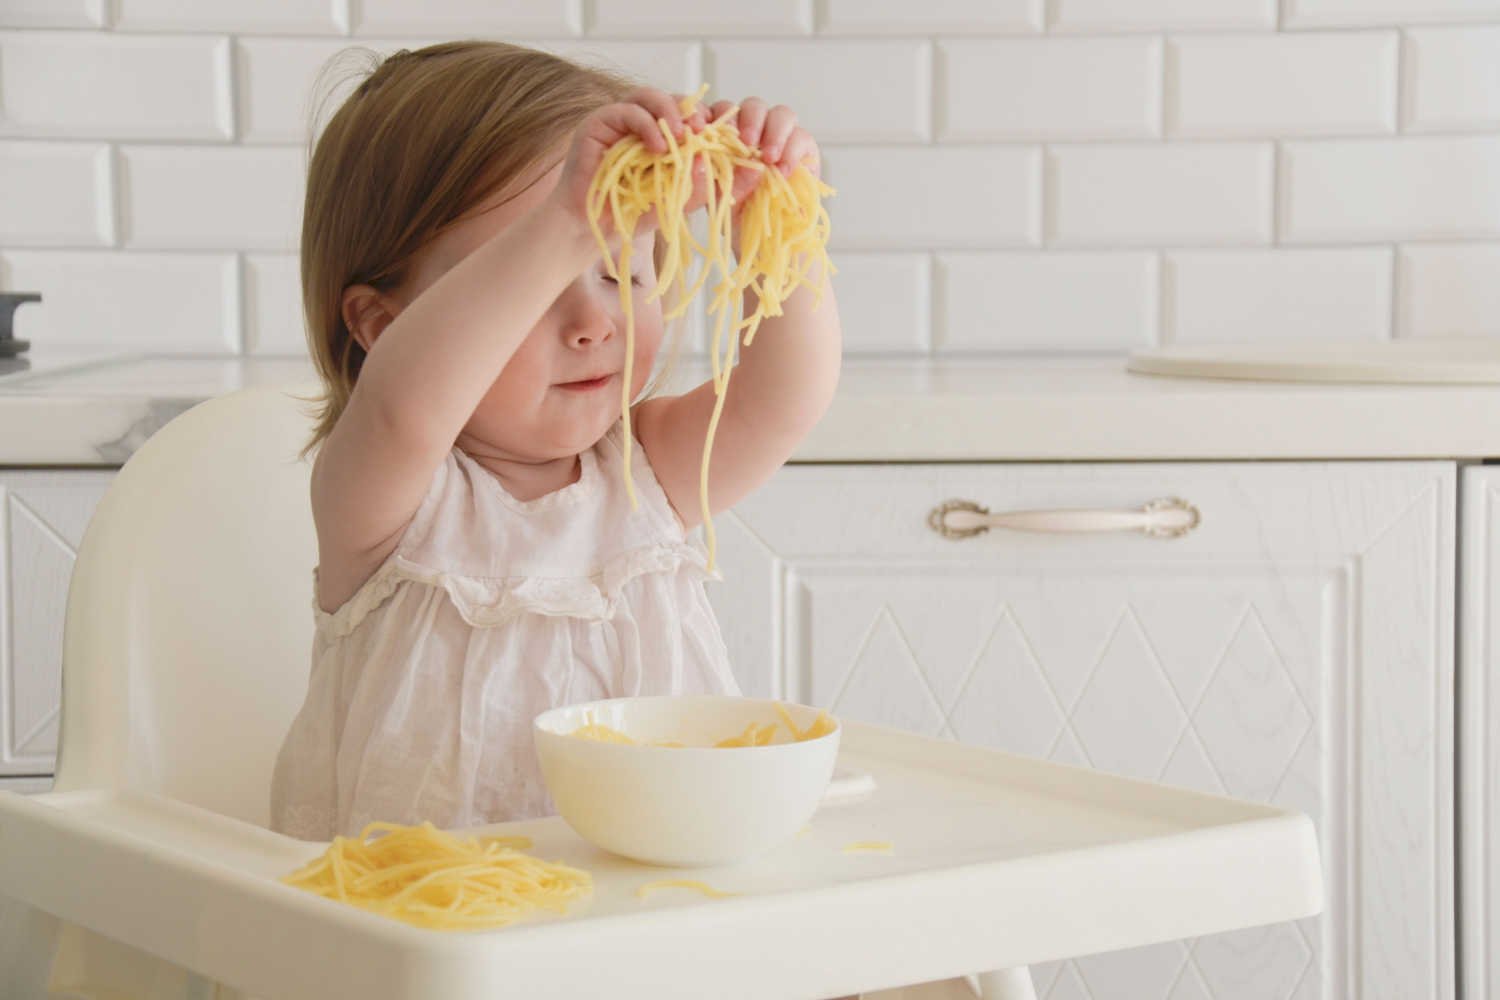 Can Babies Play With Spaghetti?